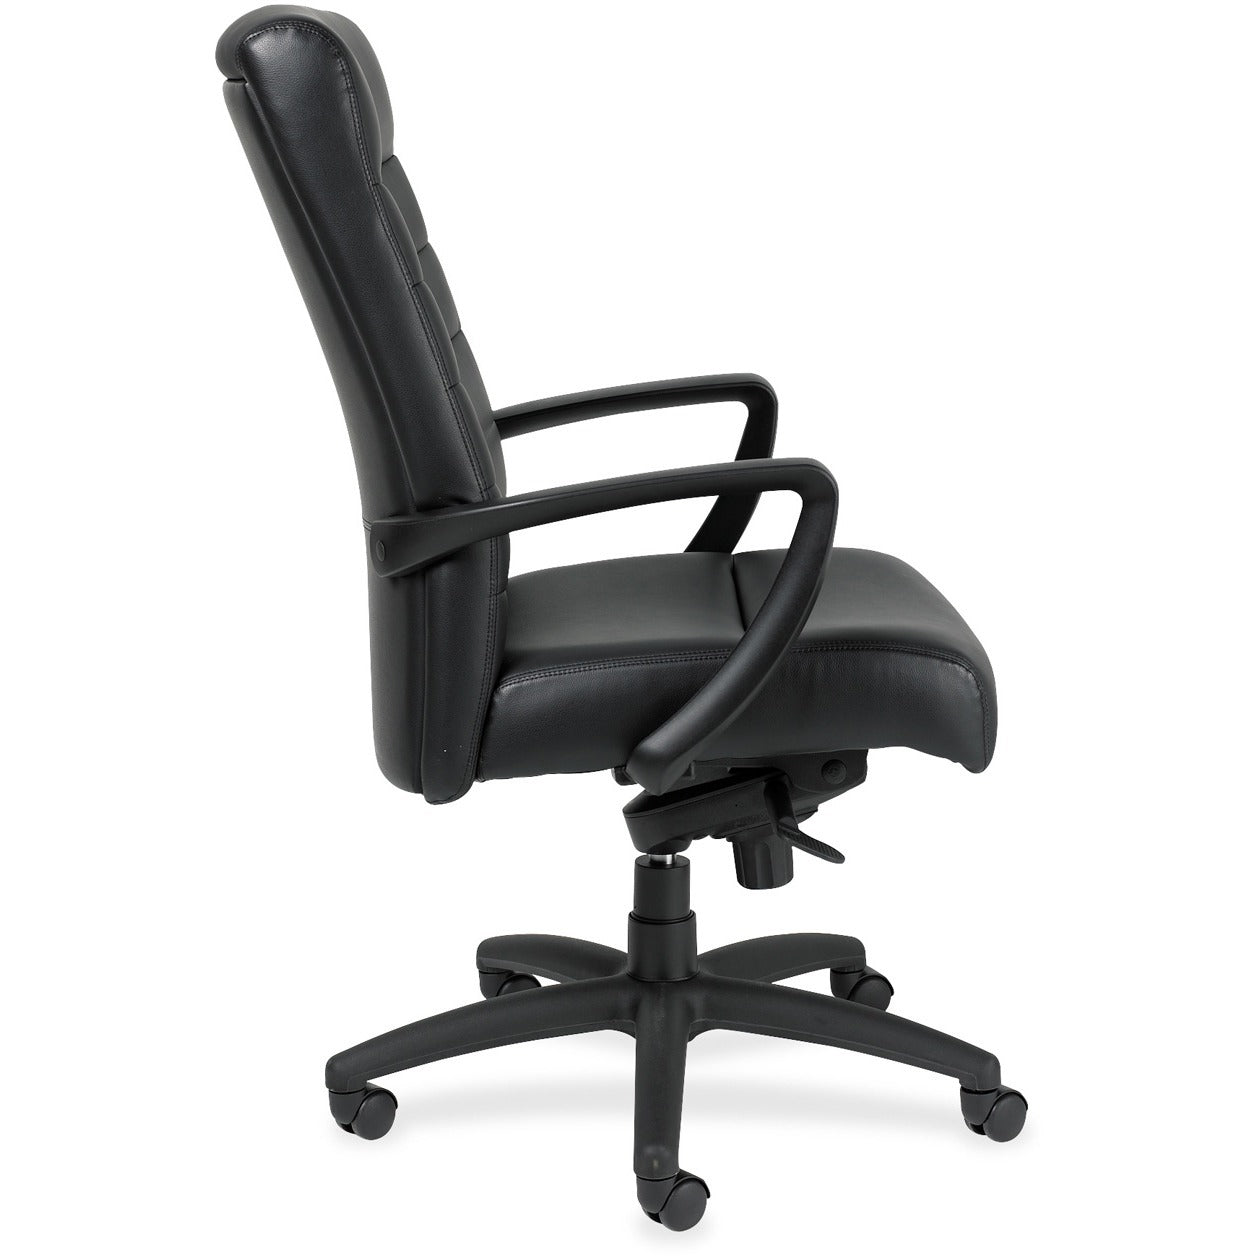 Eurotech Manchester High Back Executive Chair - Black Leather Seat - Black Leather Back - Steel Frame - 5-star Base - 1 Each - 5